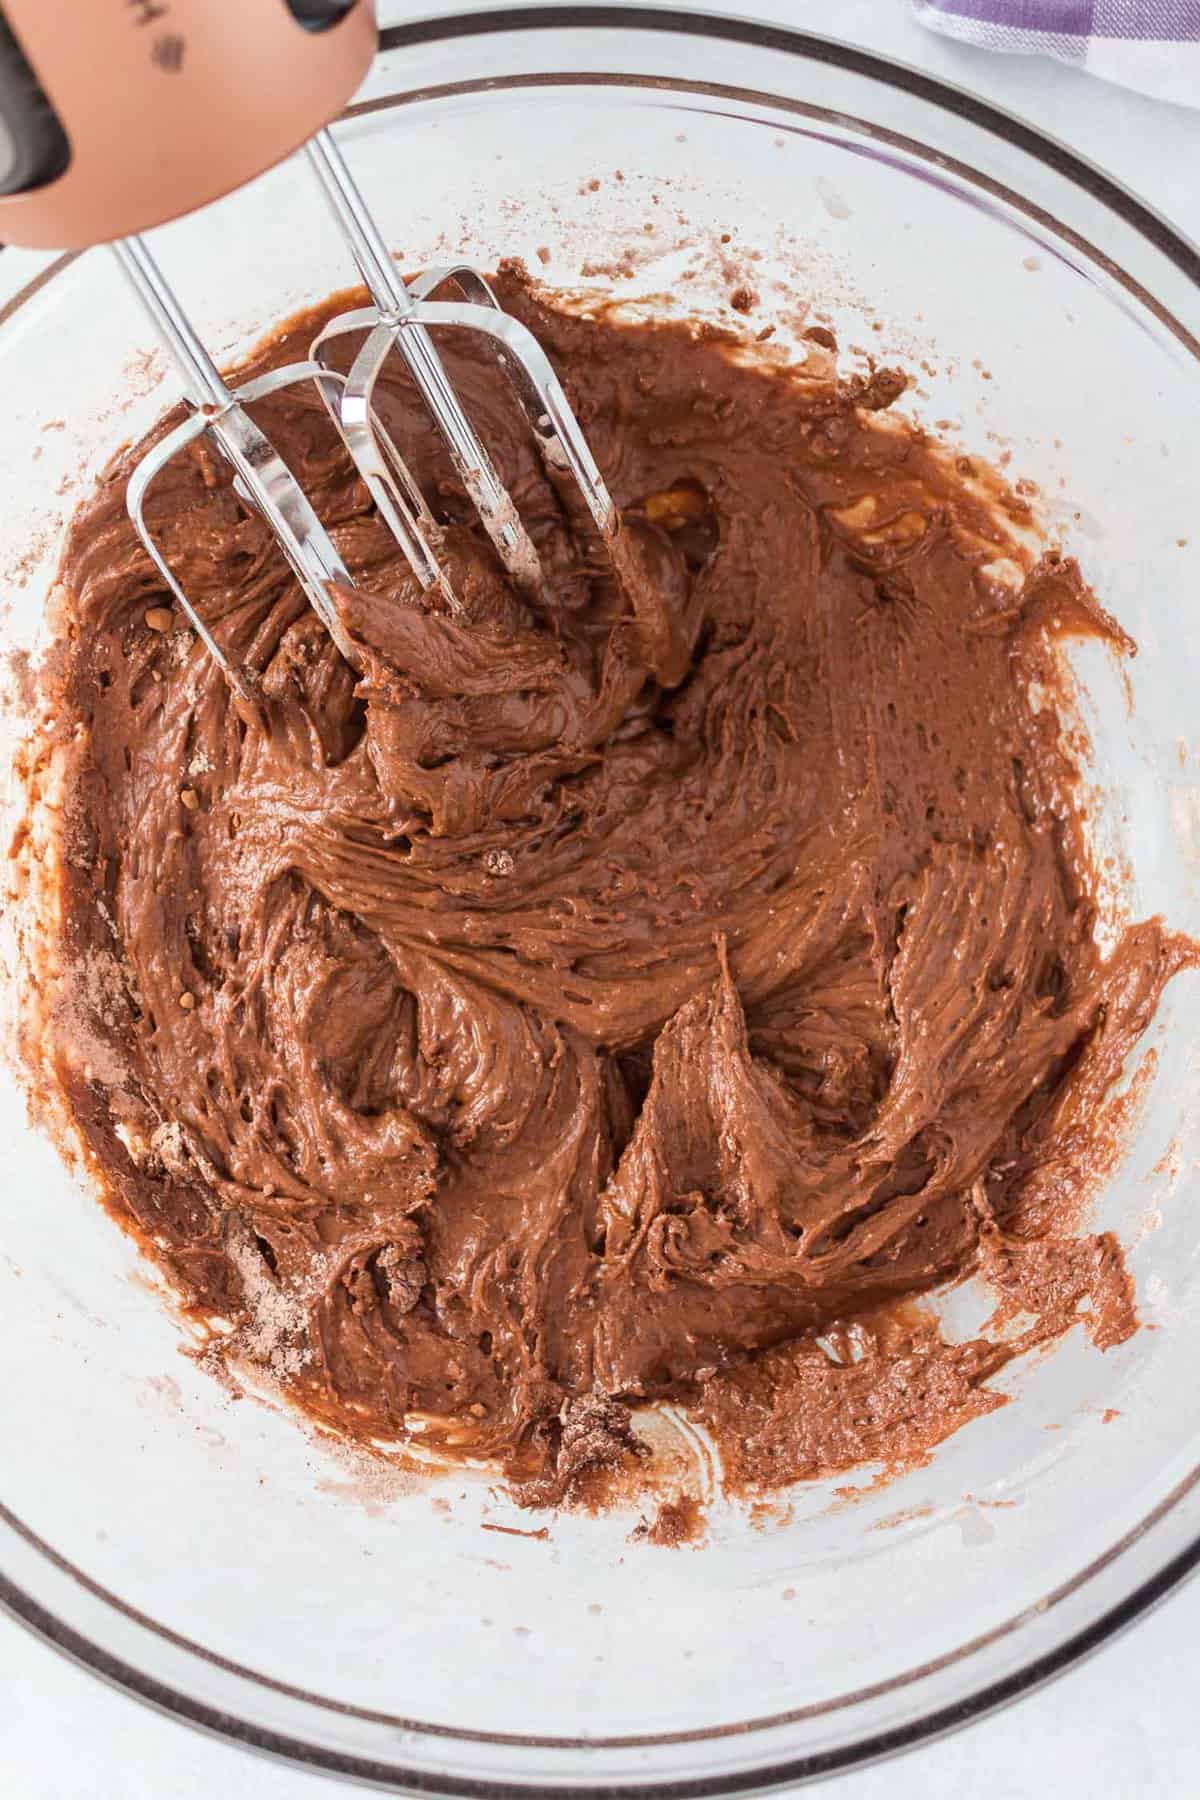 Chocolate batter in a bowl.